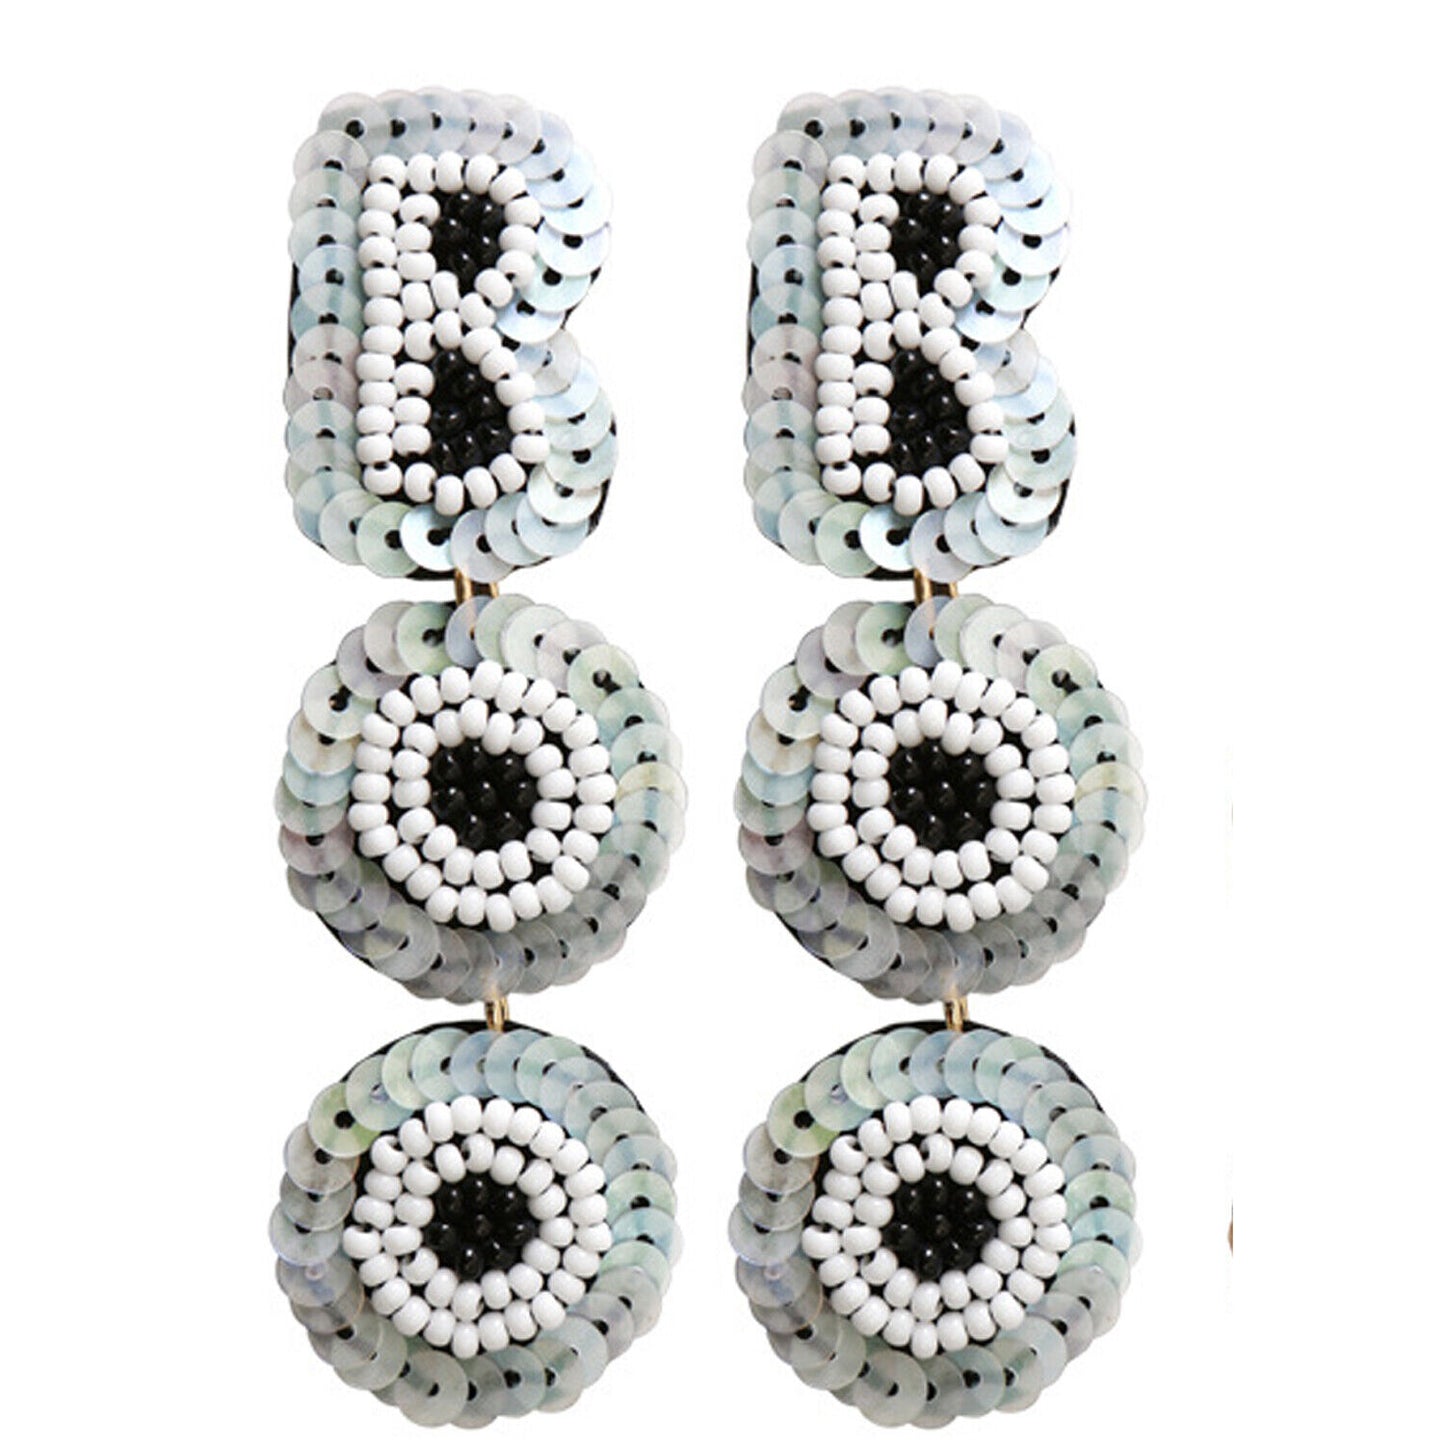 That's My Boo! Beaded Sequin Earrings